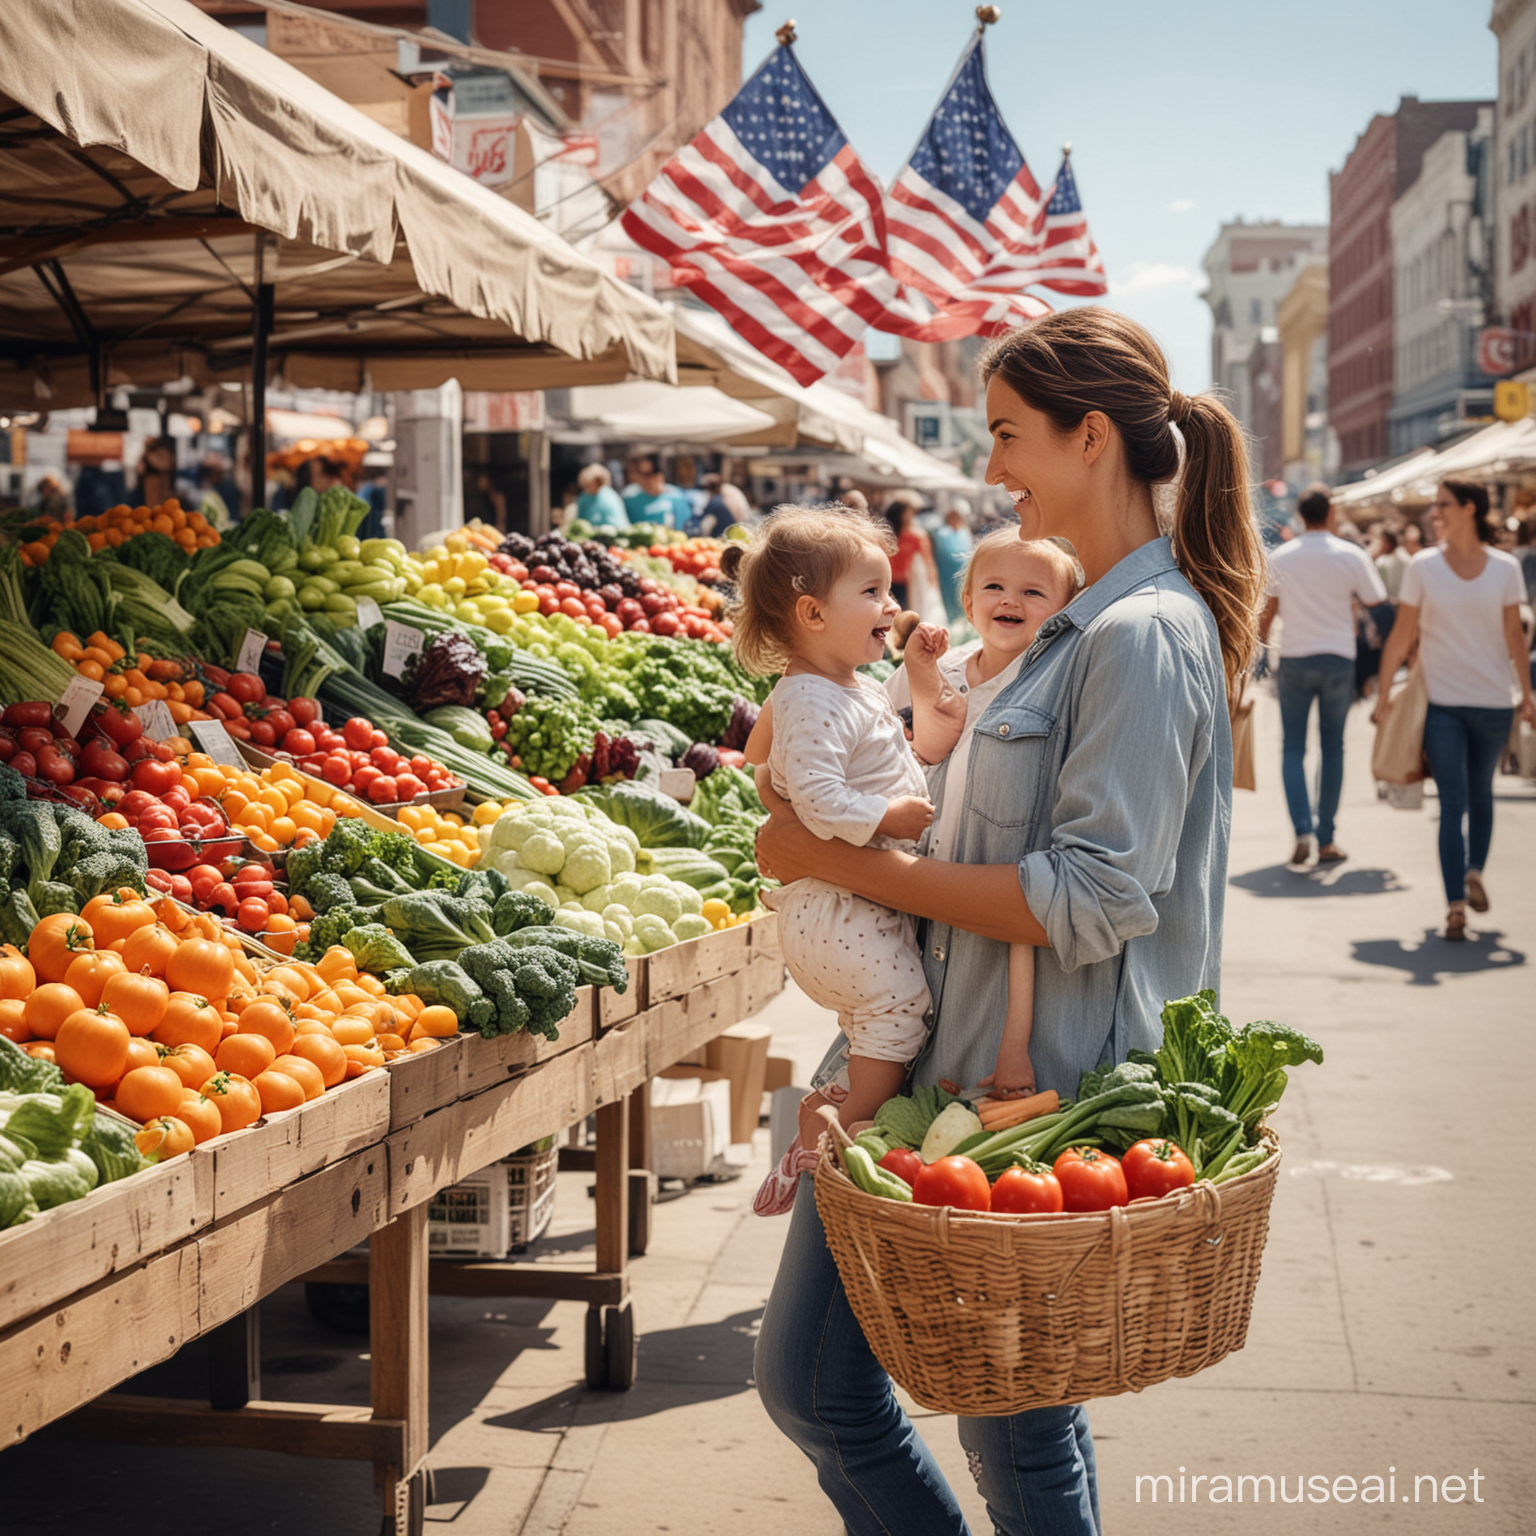 modern picture of market with happy woman and child buying vegetable in USA side view without flag